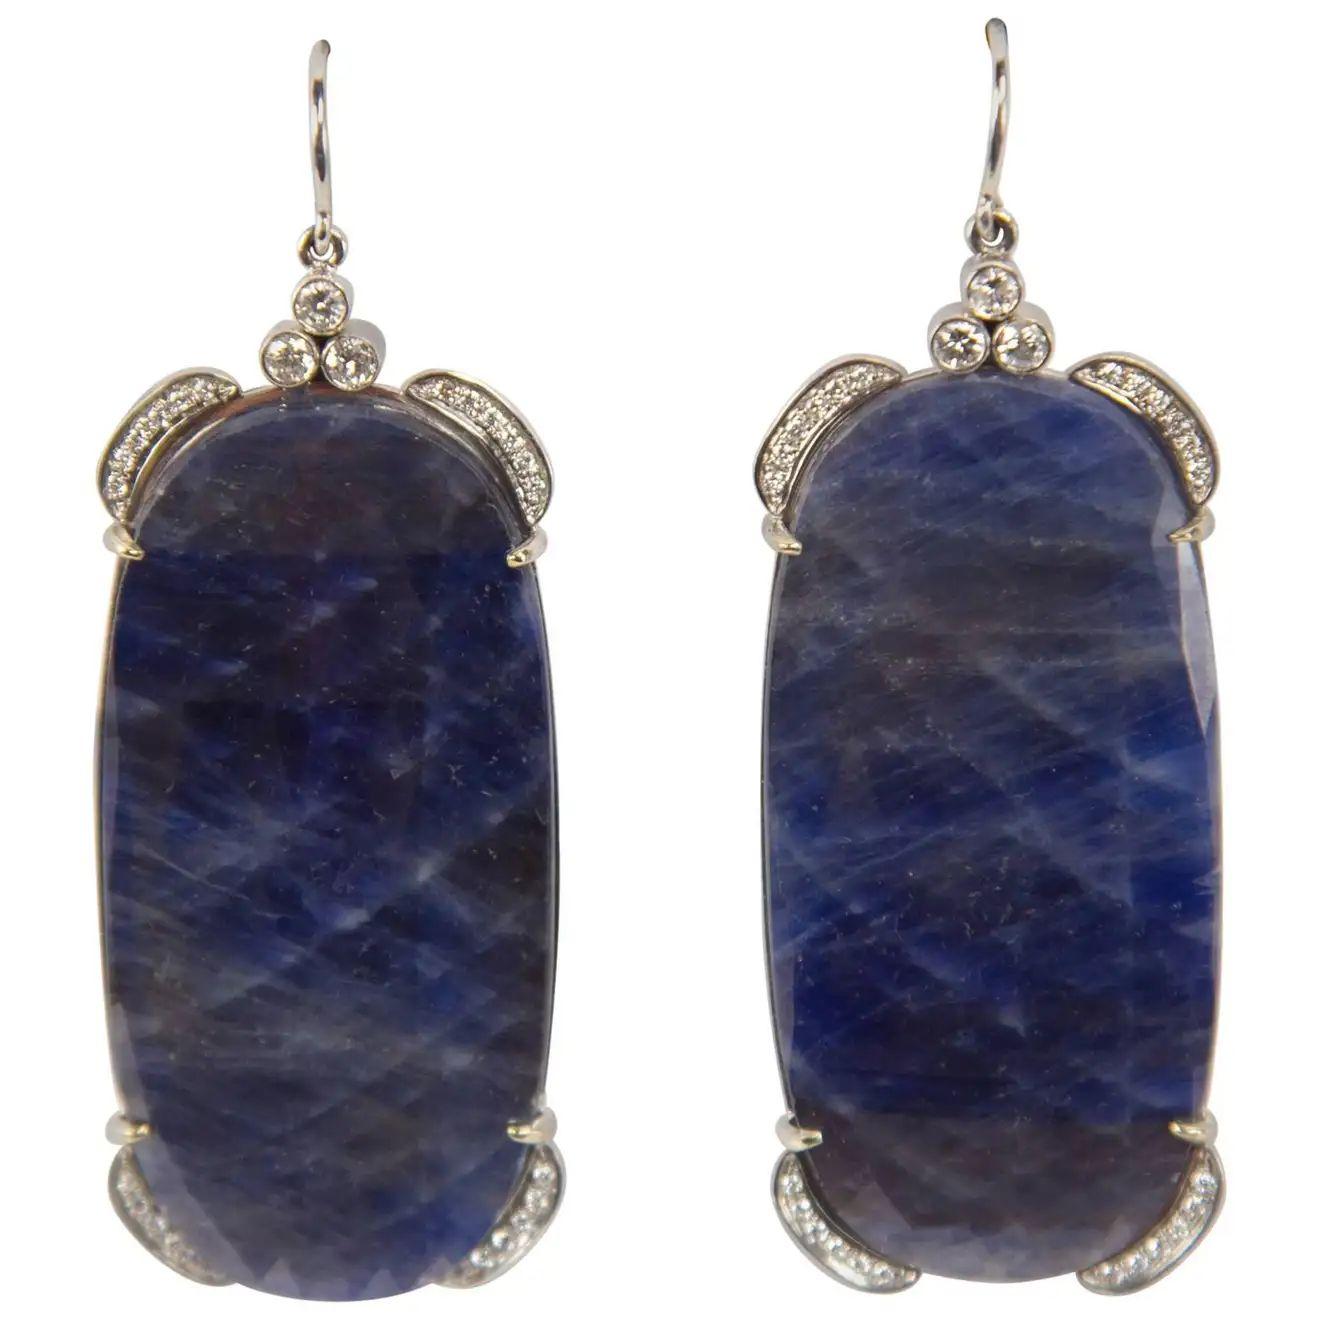 Sensational pair of Slice faceted D-end rectangular Blue Sapphire Dangle Earrings enhanced by round cut Diamonds; a total of 48 diamonds with a total weight of approx. .50 carat plus 6 diamonds with a total weight of approx. .30 carat; hand crafted